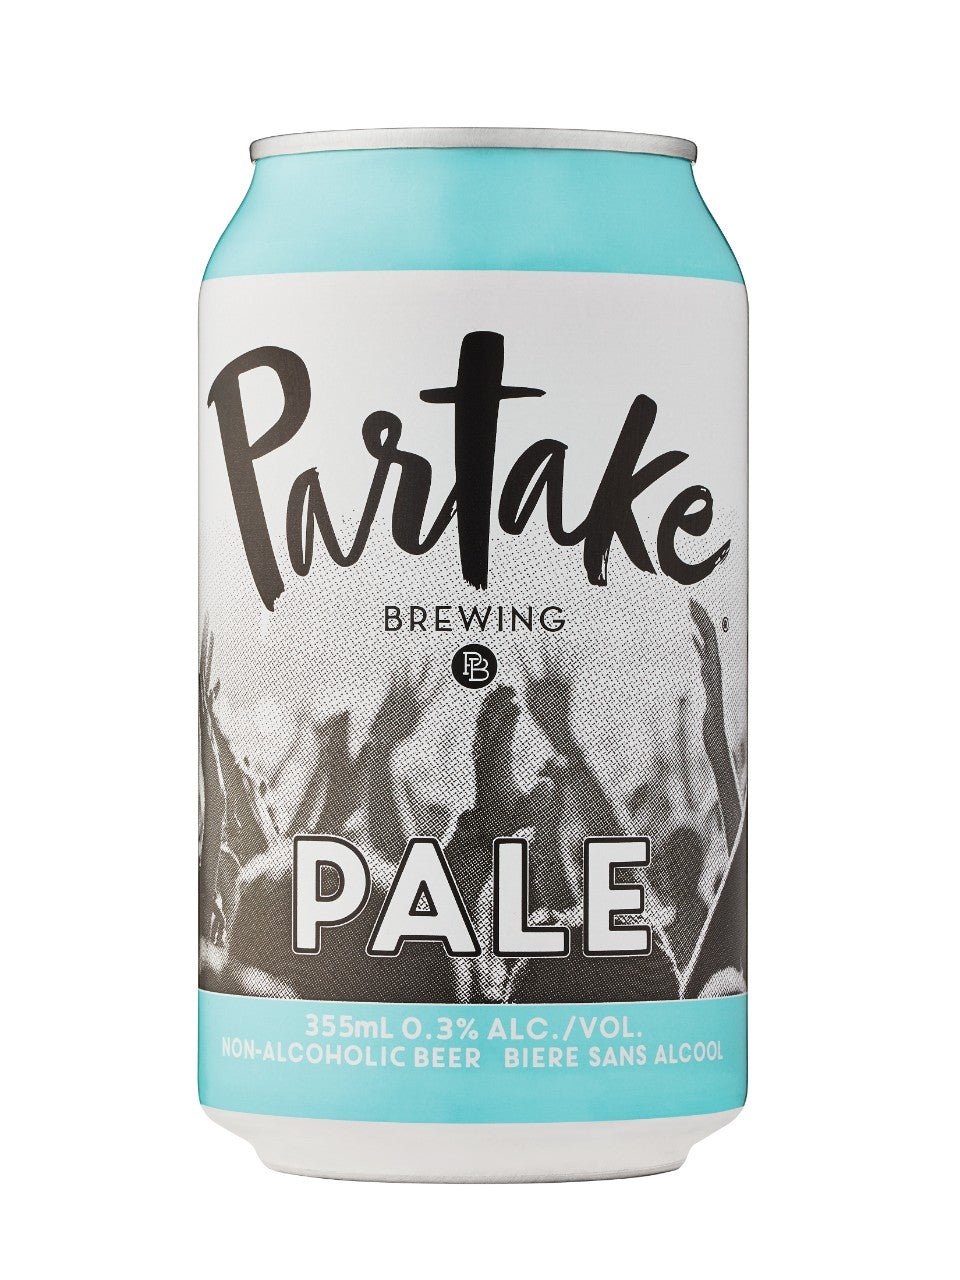 Partake Brewing Non-Alcoholic Pale Ale 355 mL can